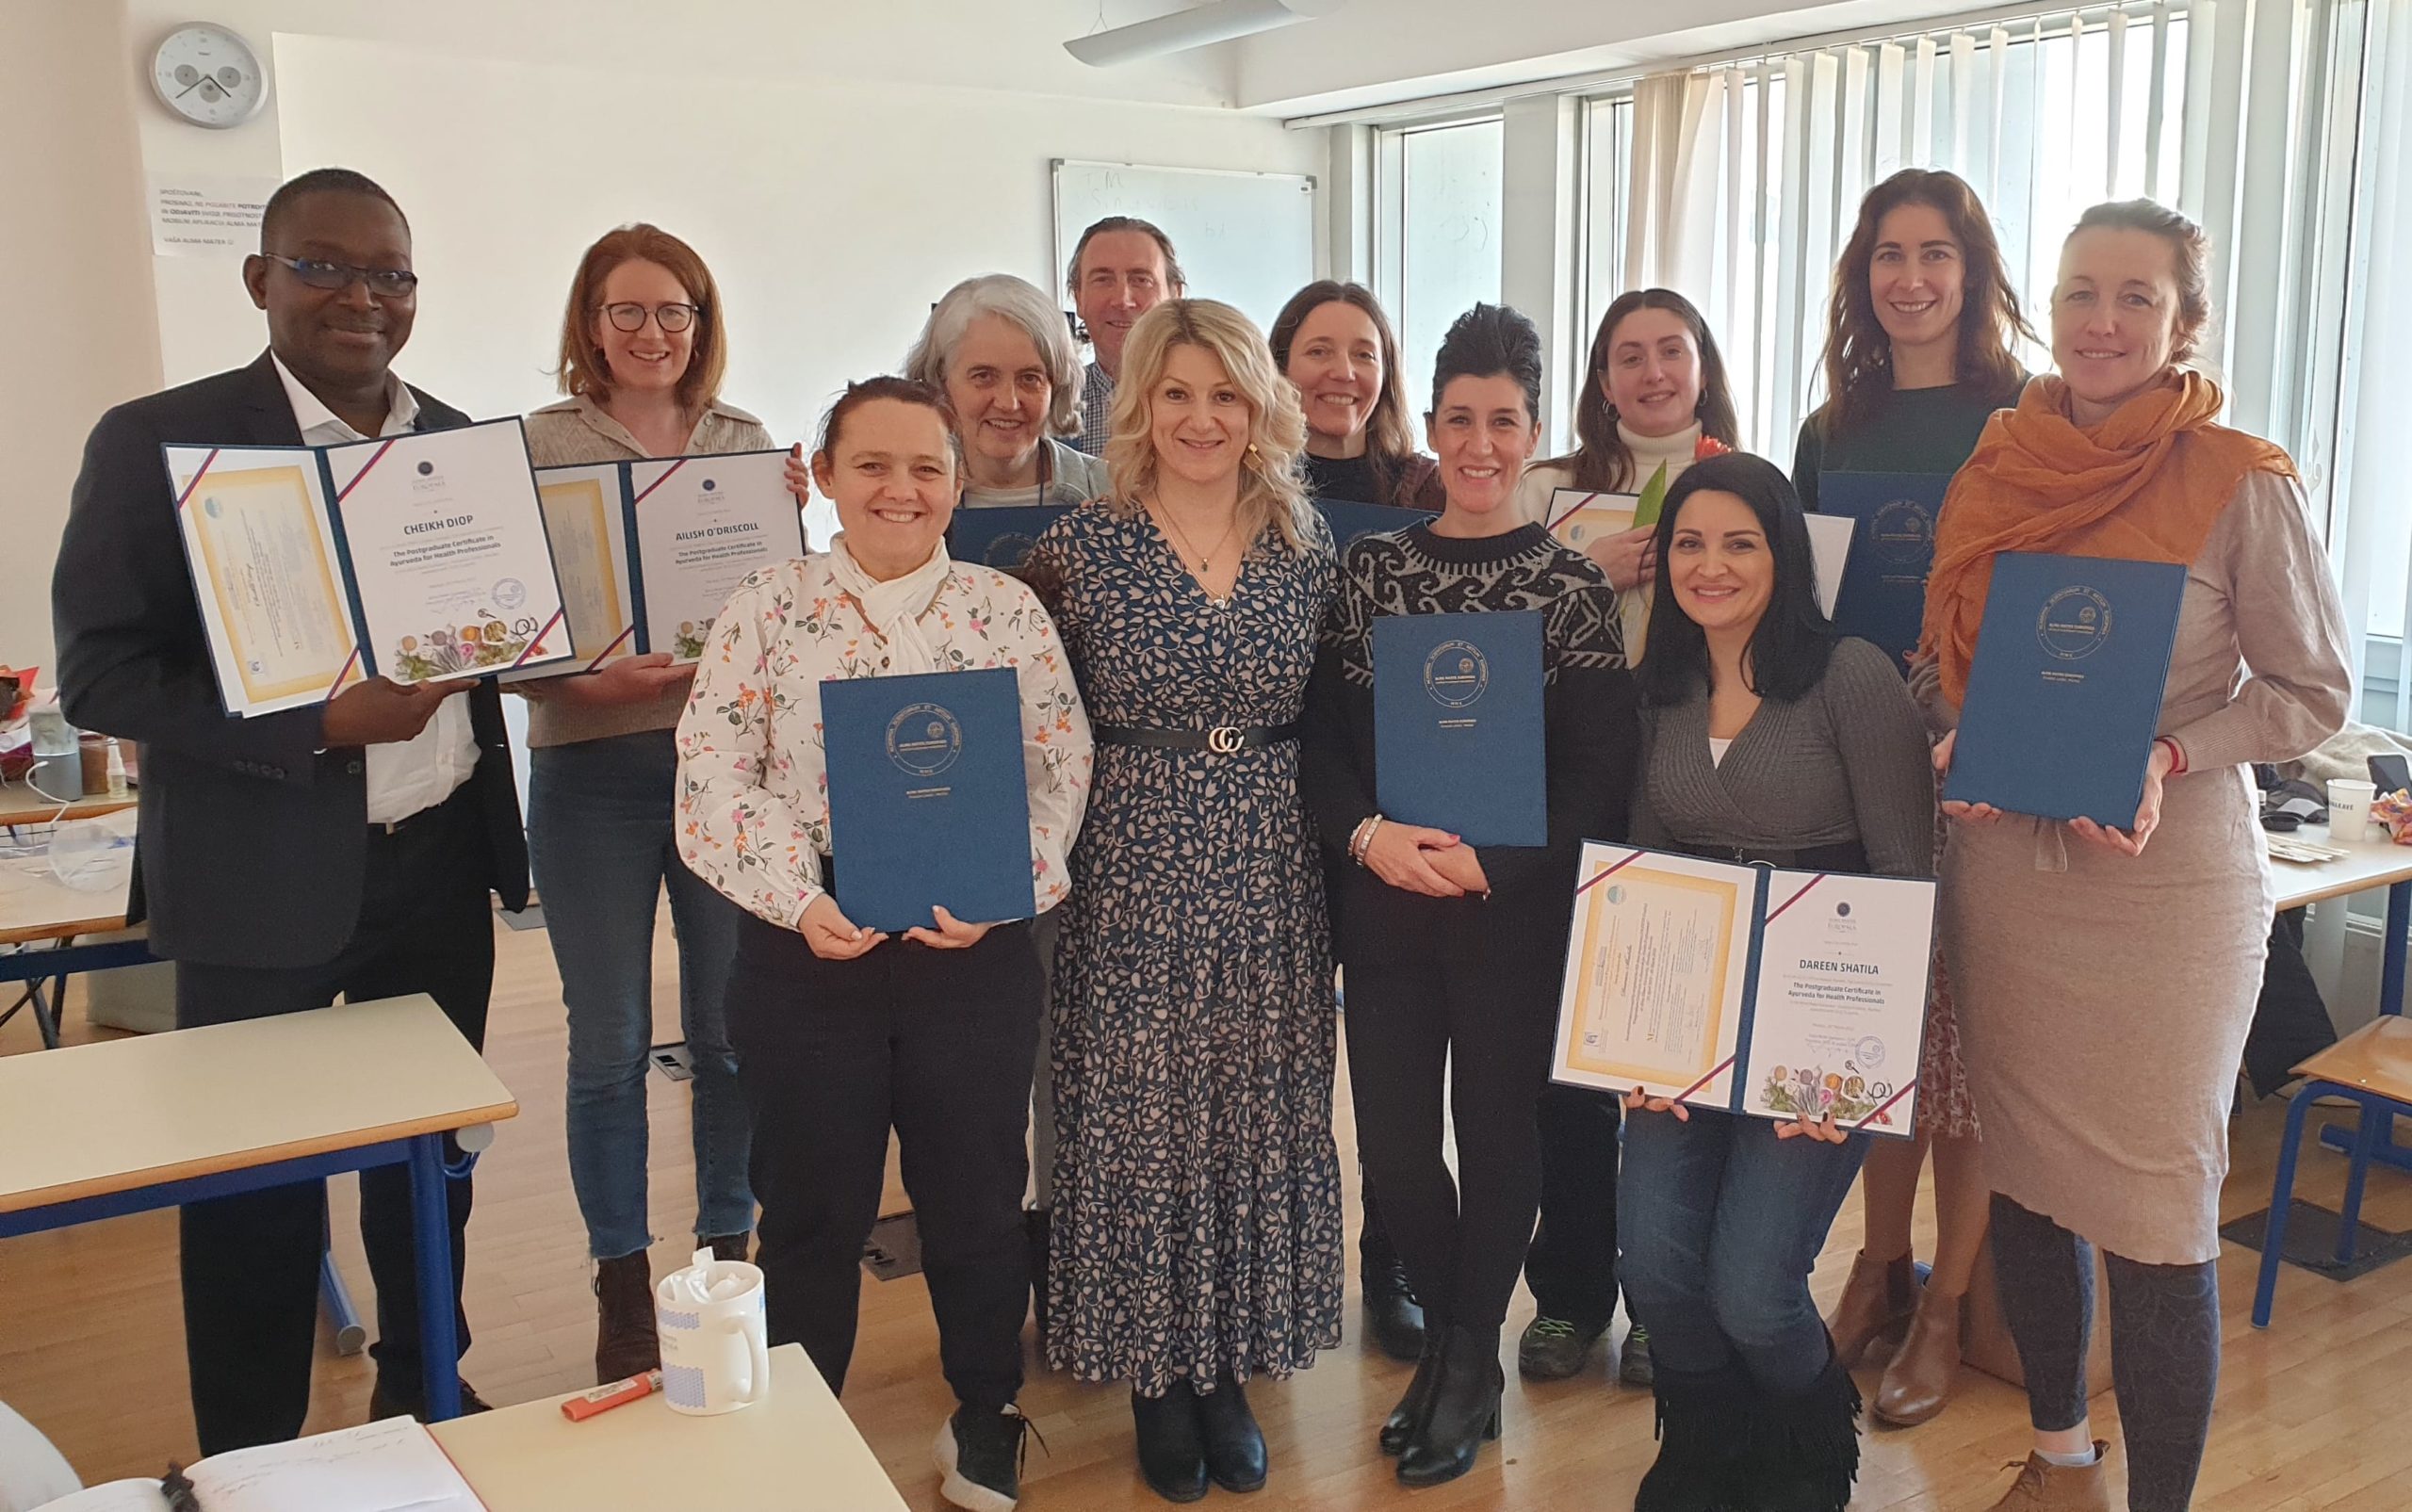 Dr Gordana Marković surrounded by graduating students from 9 countries who are holding their Postgraduate Certificates in Ayurveda for Health Professionals